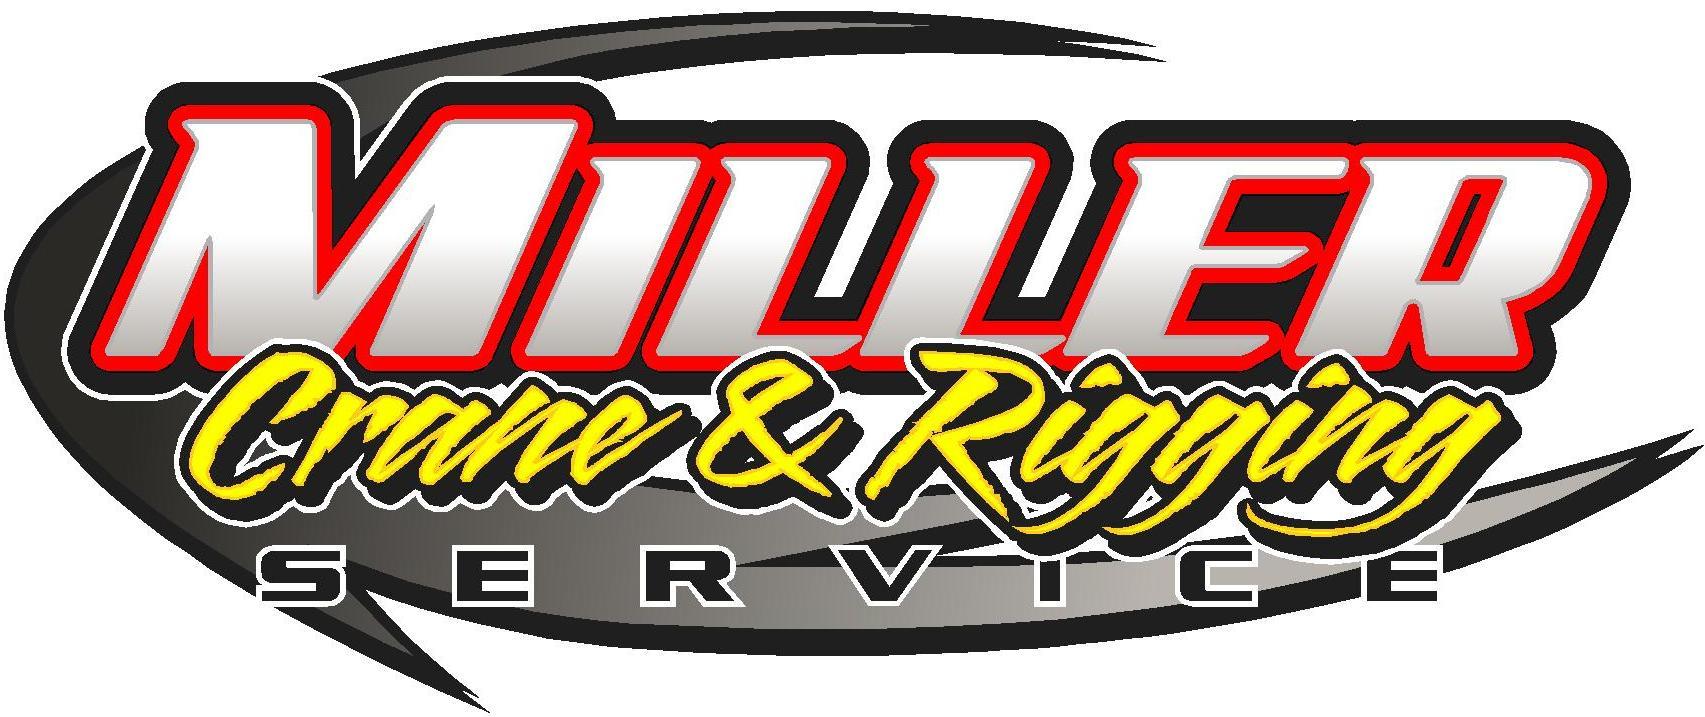 Cool Trucking Company Logo - Miller Rigging and Crane Service